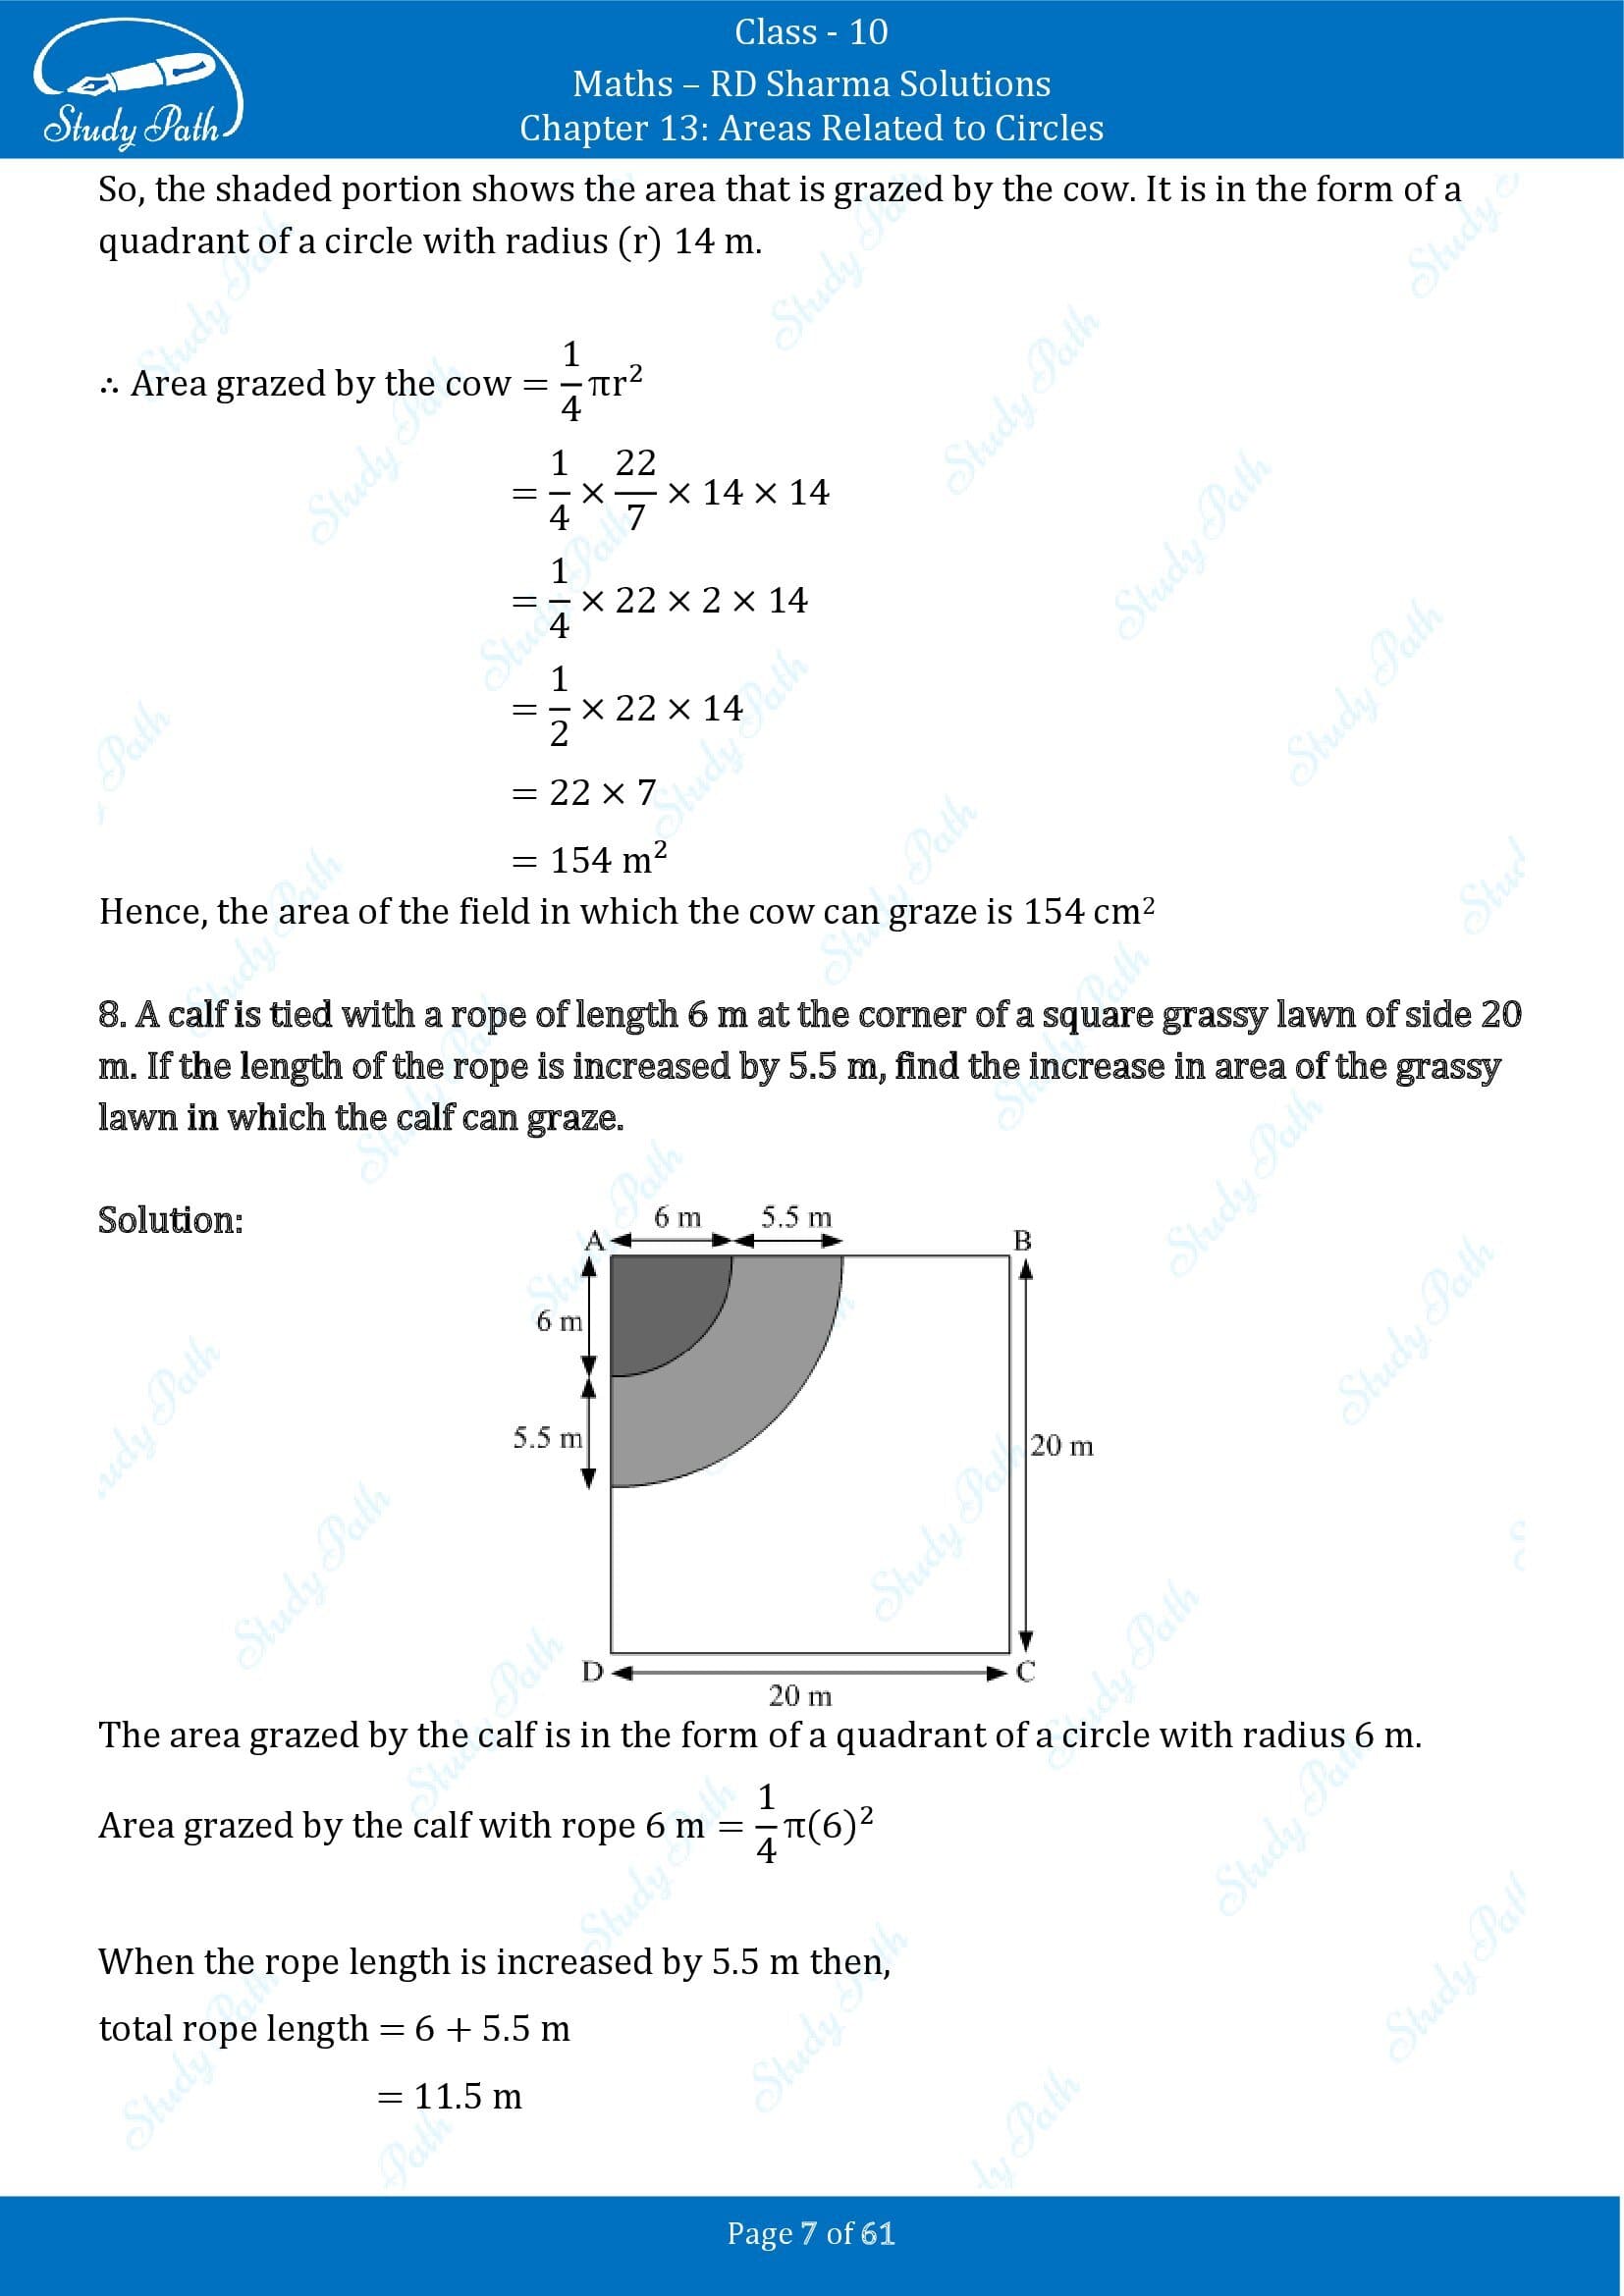 RD Sharma Solutions Class 10 Chapter 13 Areas Related to Circles Exercise 13.4 00007